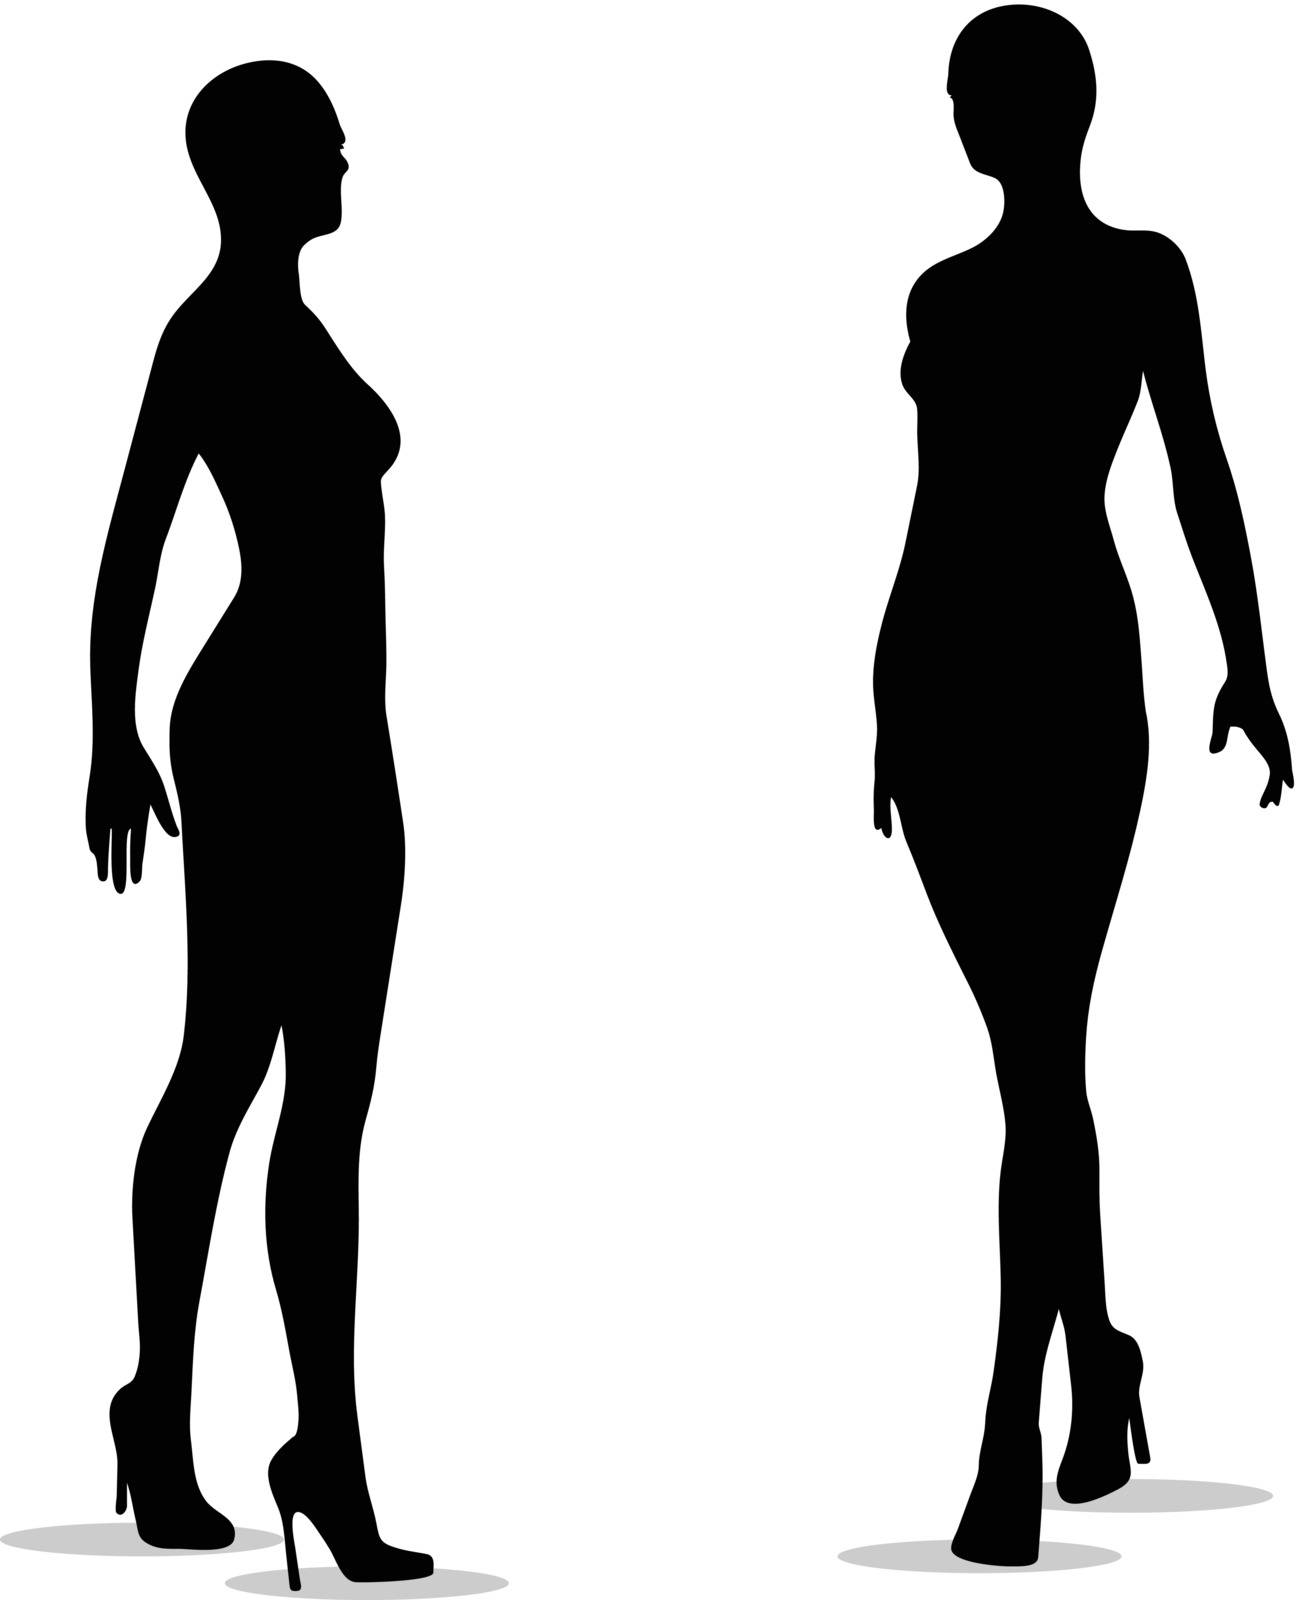 EPS 10 Vector Illustration of female legs with high heels